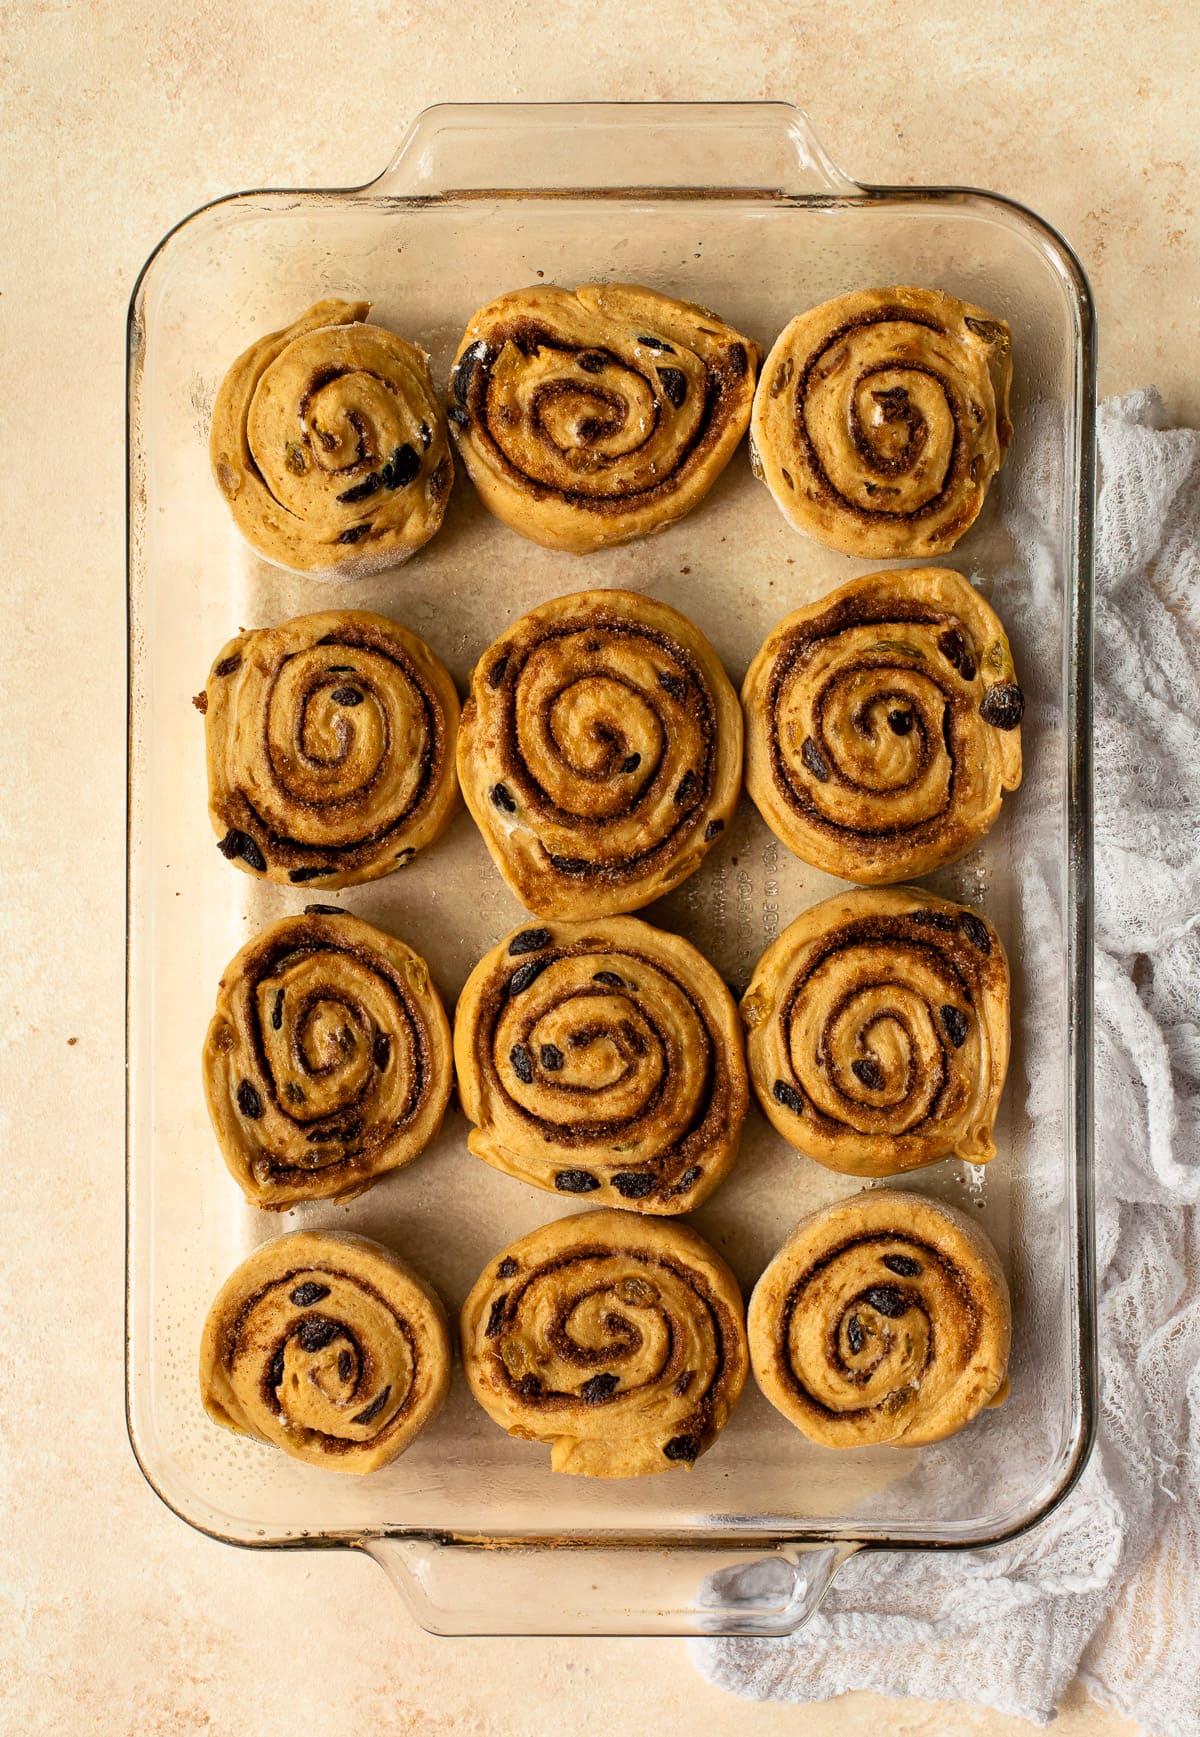 Sliced cinnamon rolls arranged in a glass baking dish to rise.